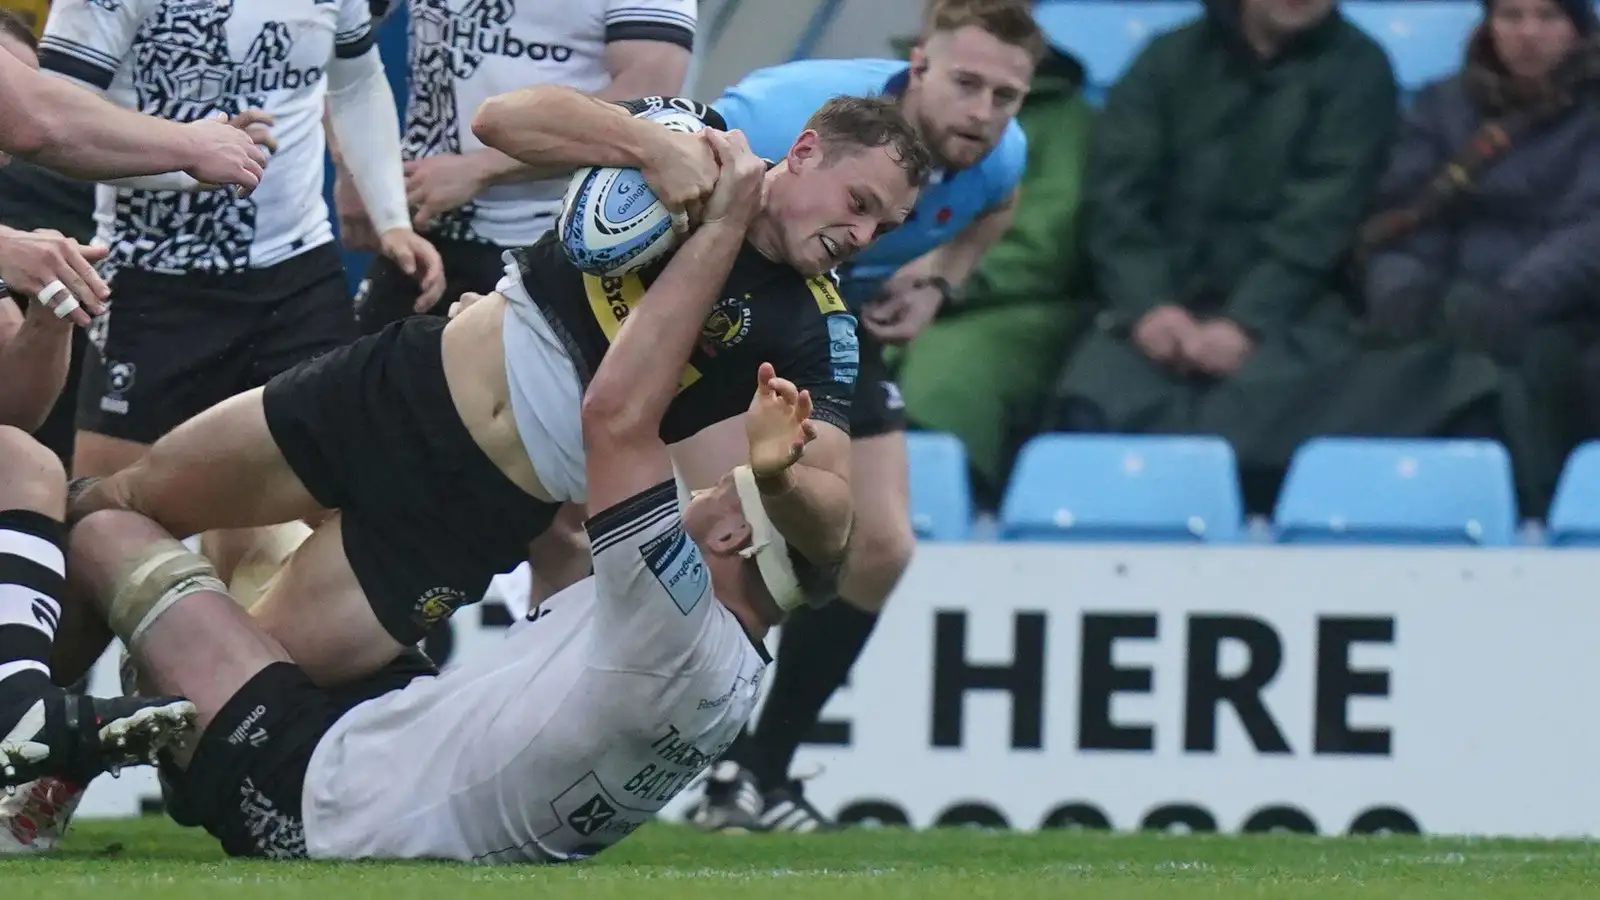 Tom Wyatt scoring a try for Exeter Chiefs against Bristol Bears in the Premiership.